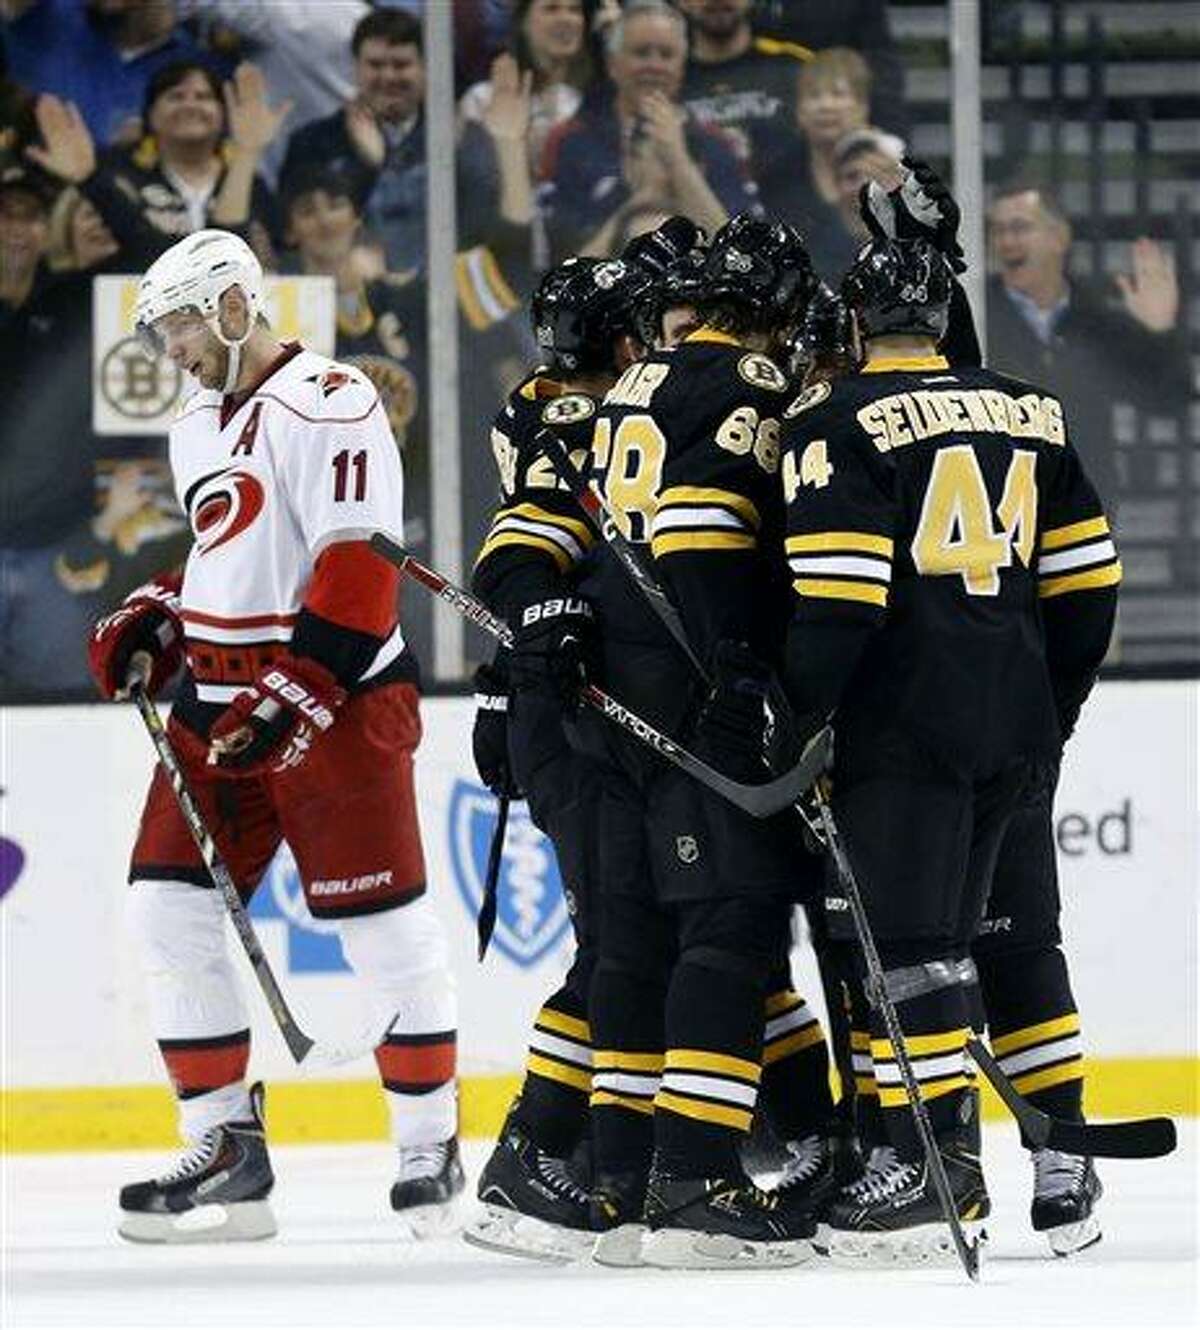 Boston Bruins' Dennis Seidenberg (44) and Jaromir Jagr (68) celebrate with teammates after Bruins' Brad Marchand scored his second goal as Carolina Hurricanes' Jordan Staal (11) skates away in the first period of an NHL hockey game in Boston, Monday, April, 8, 2013. (AP Photo/Michael Dwyer)